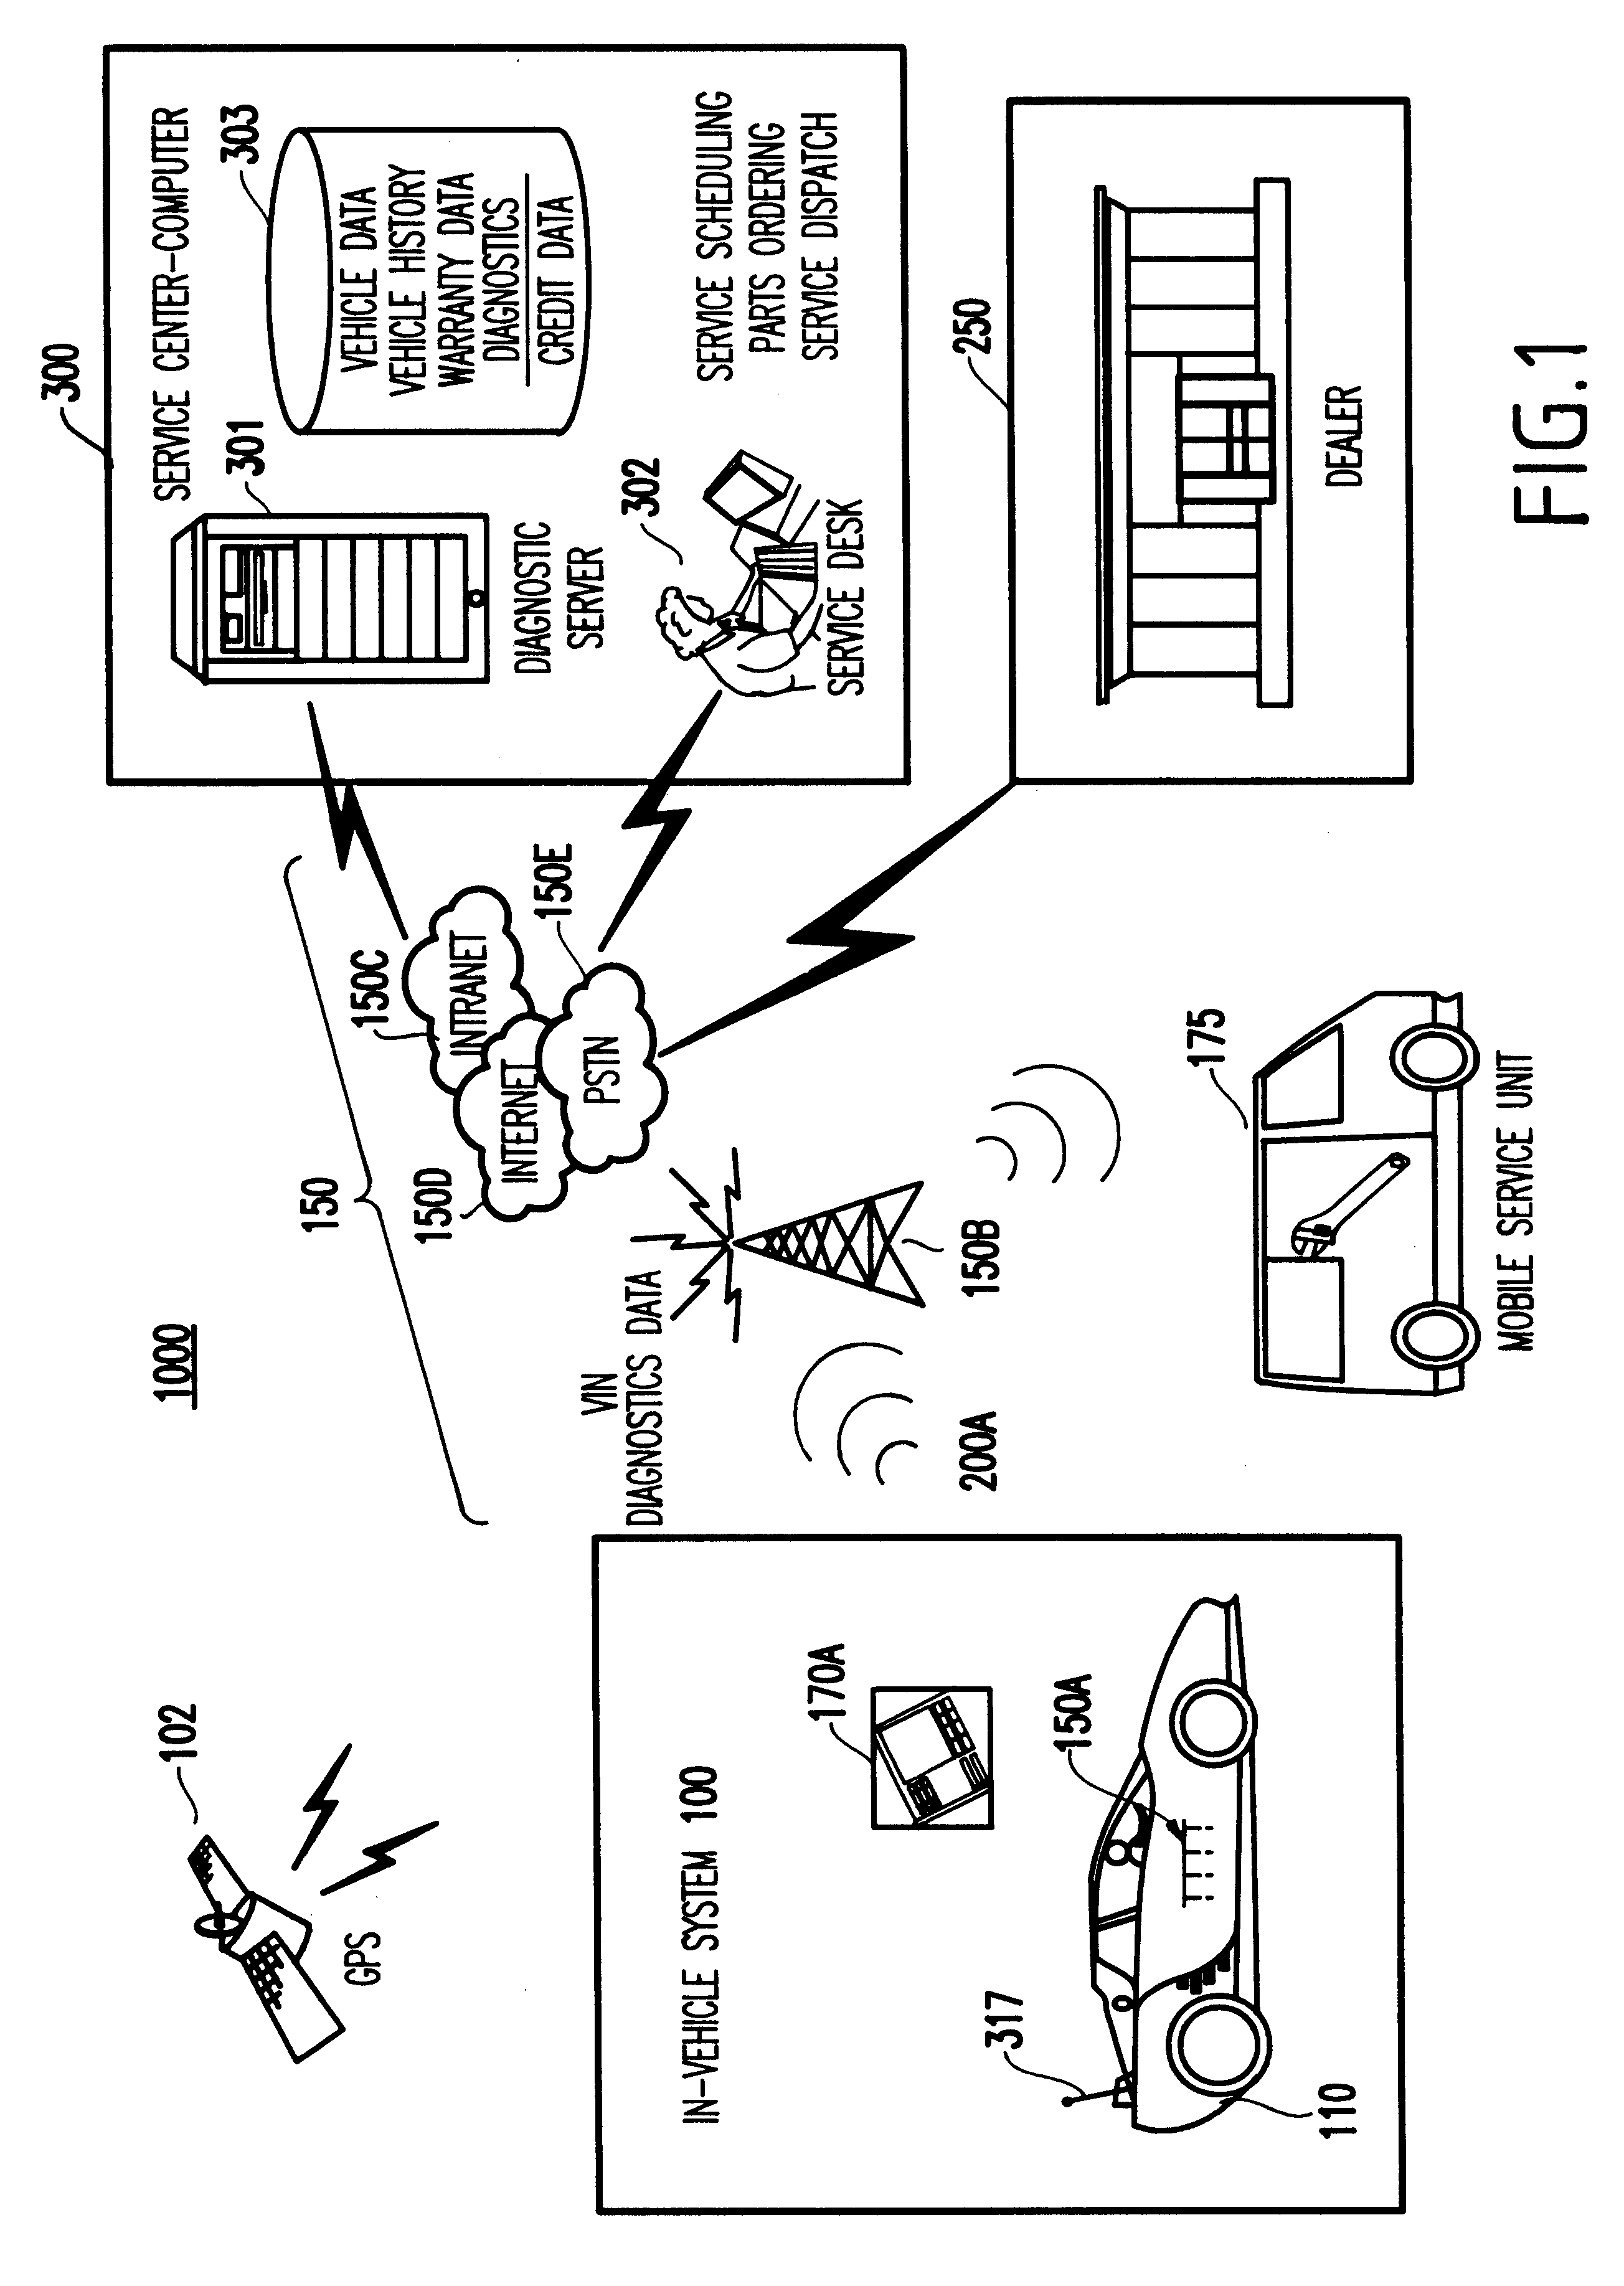 System and method for the distribution of automotive services